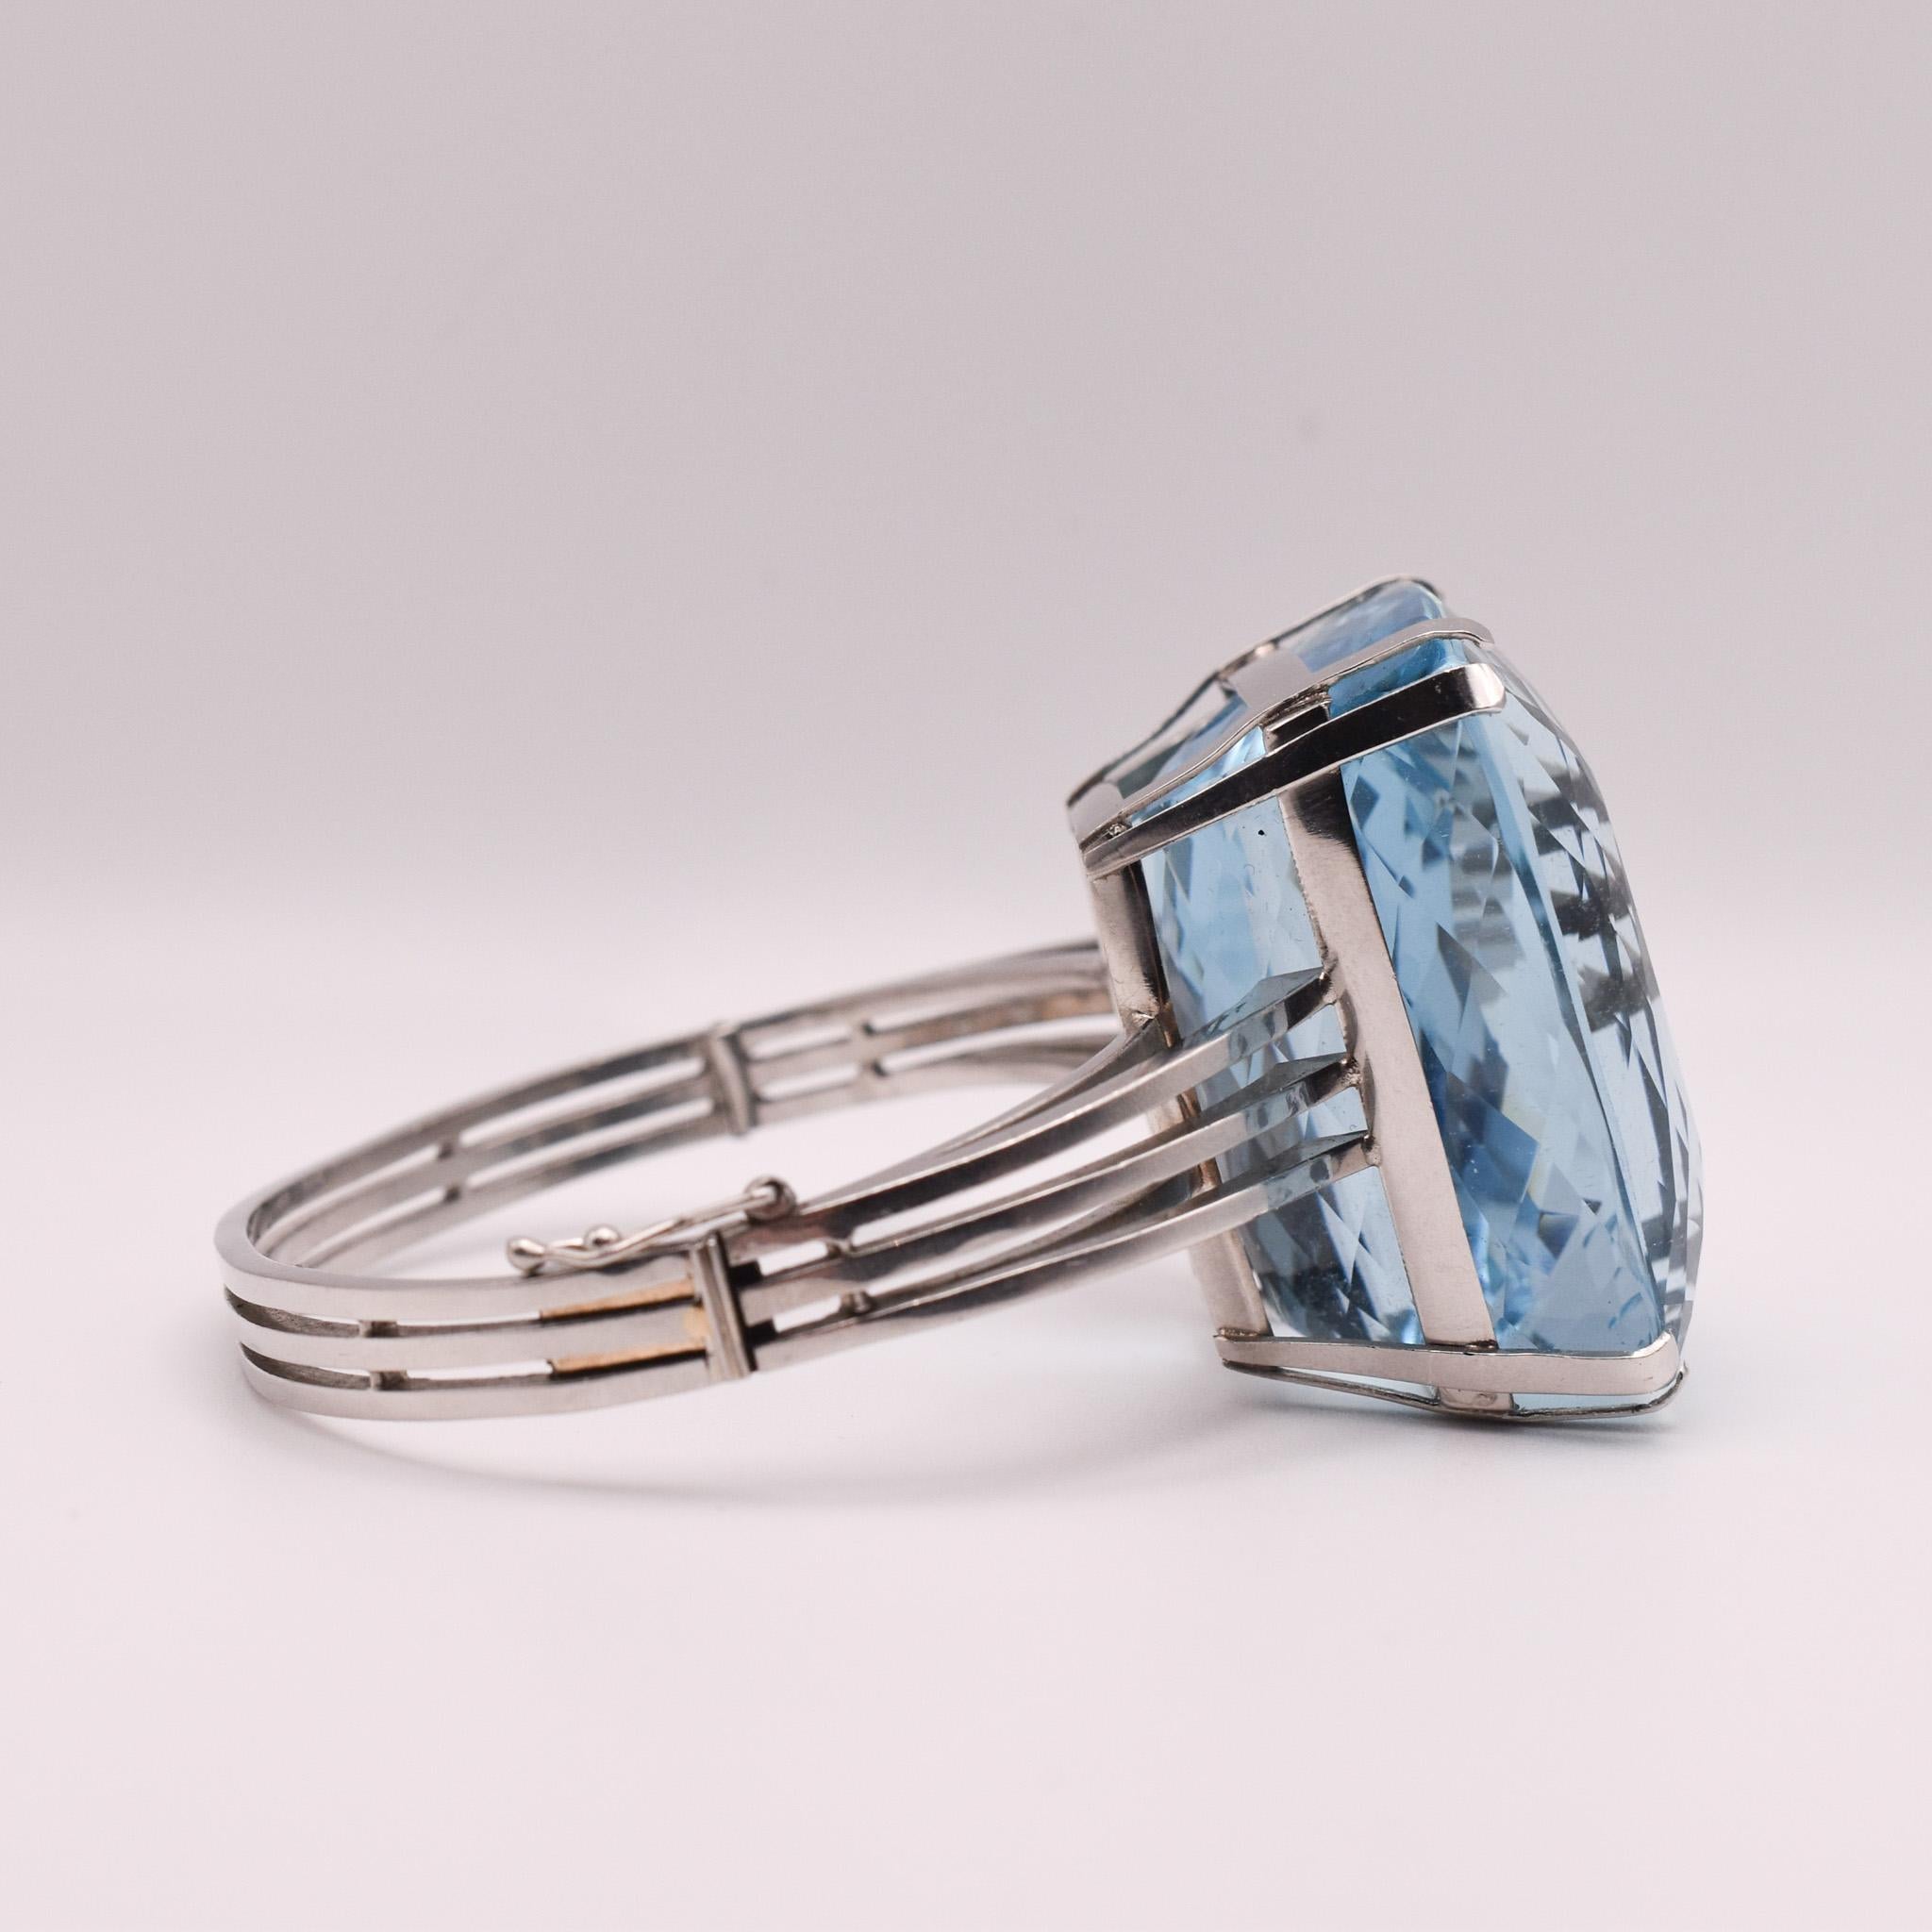 420ct Aquamarine Platinum Bangle In Excellent Condition For Sale In New York, NY